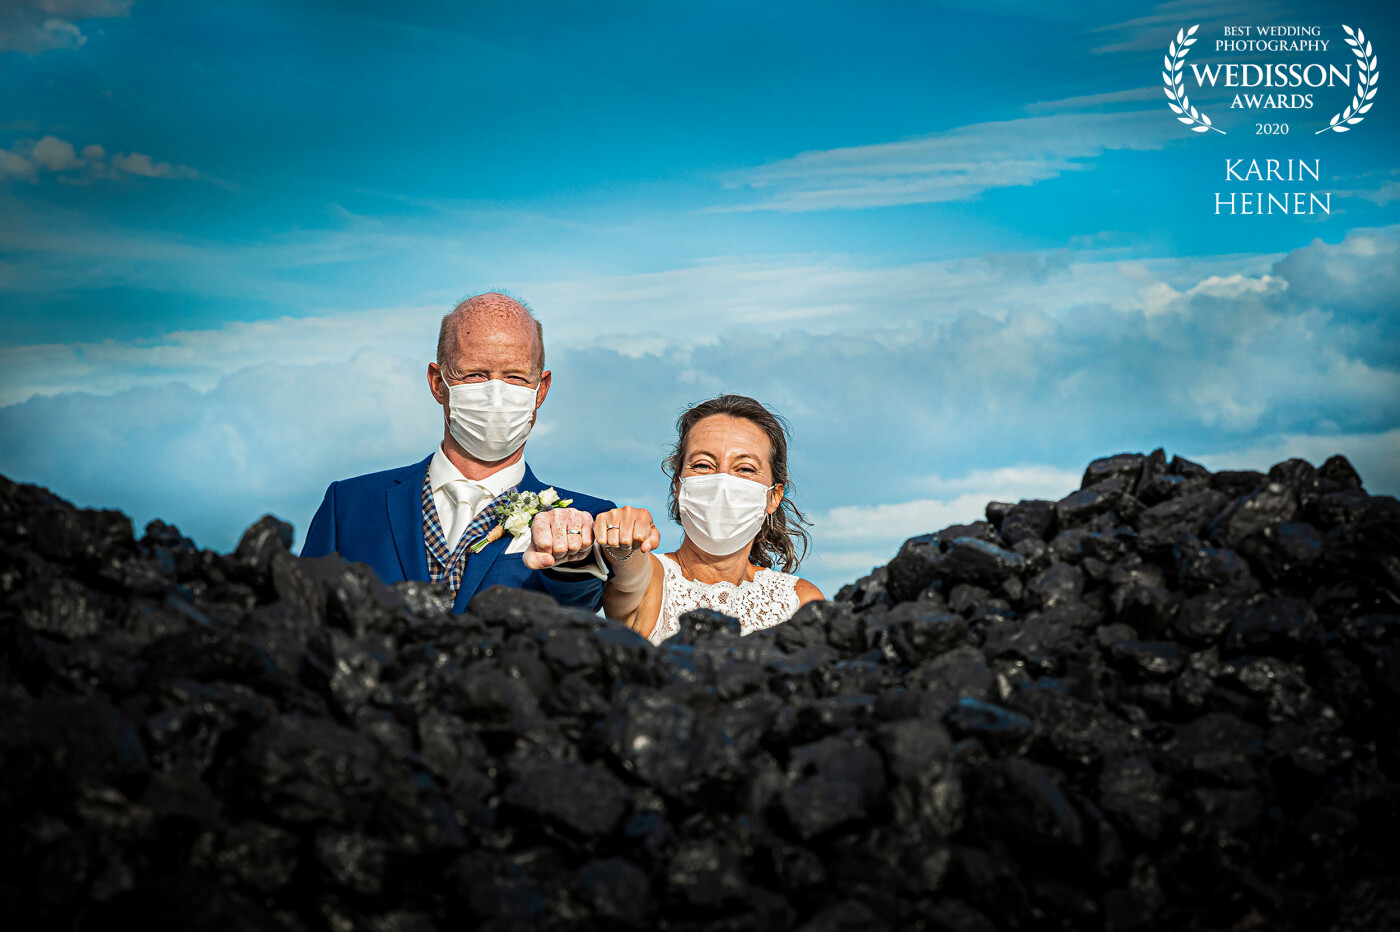 Covid-19...who hasn't heard of it? Although we had the honor of shooting about 40 weddings in 2020, this lovely couple was the first to gladly pose for a rough wedding shot with masks on. The pile of coal in the front adds a perfect contrast to the deep blue sky. Thanks so much to all at Wedisson for this 12th award. We are honored!